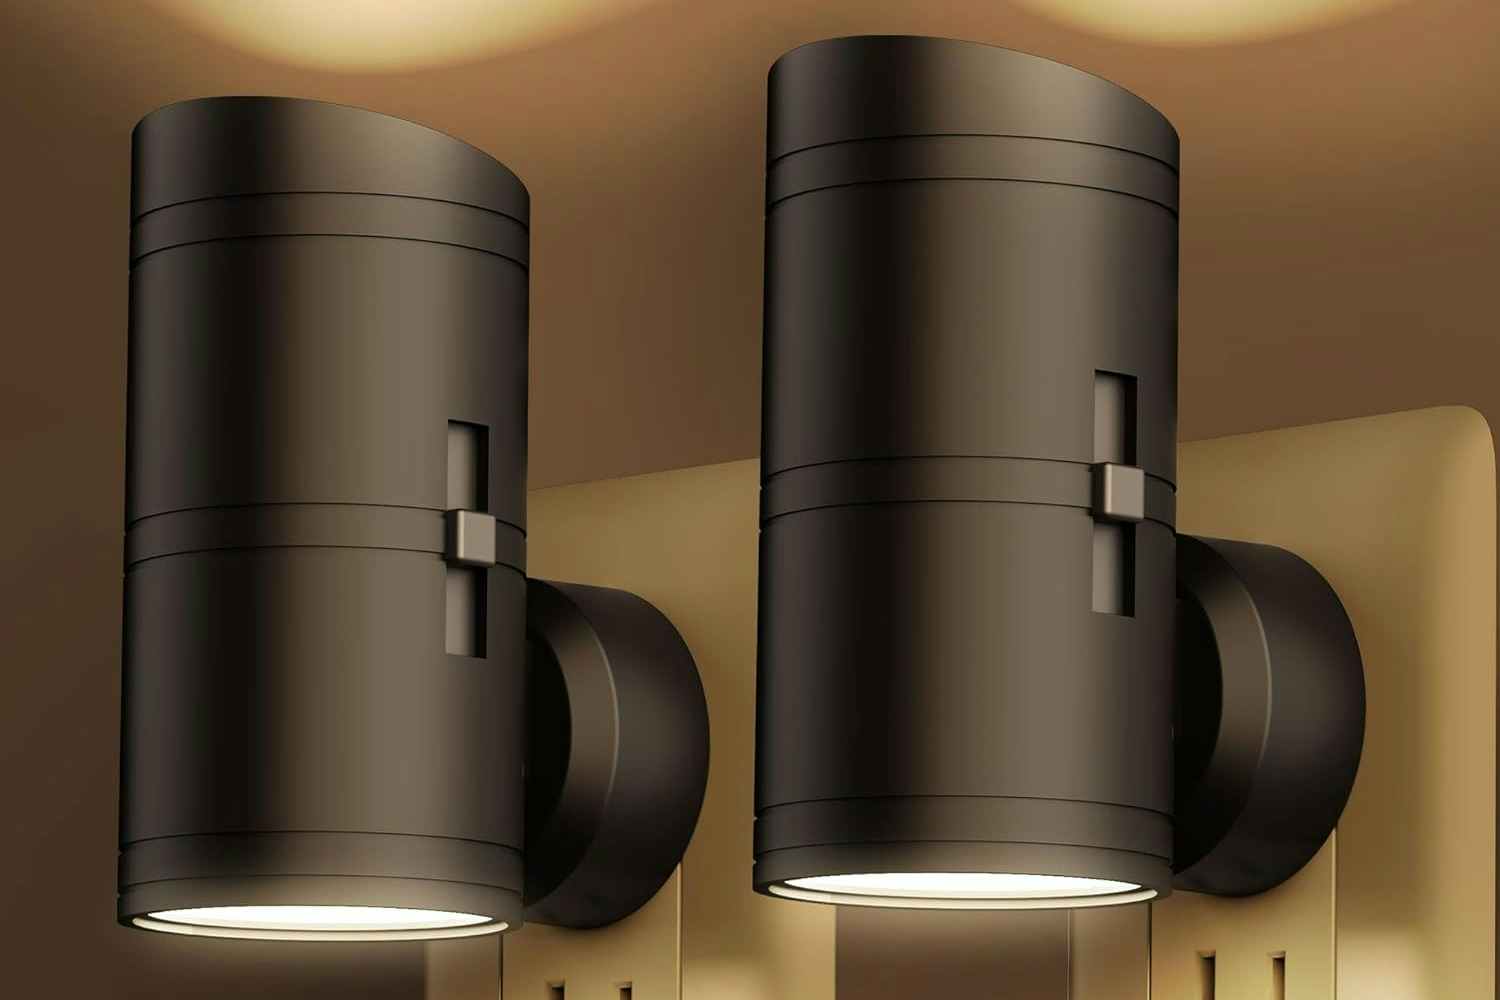 Dusk to Dawn Night-Light 2-Pack, Only $8.48 on Amazon